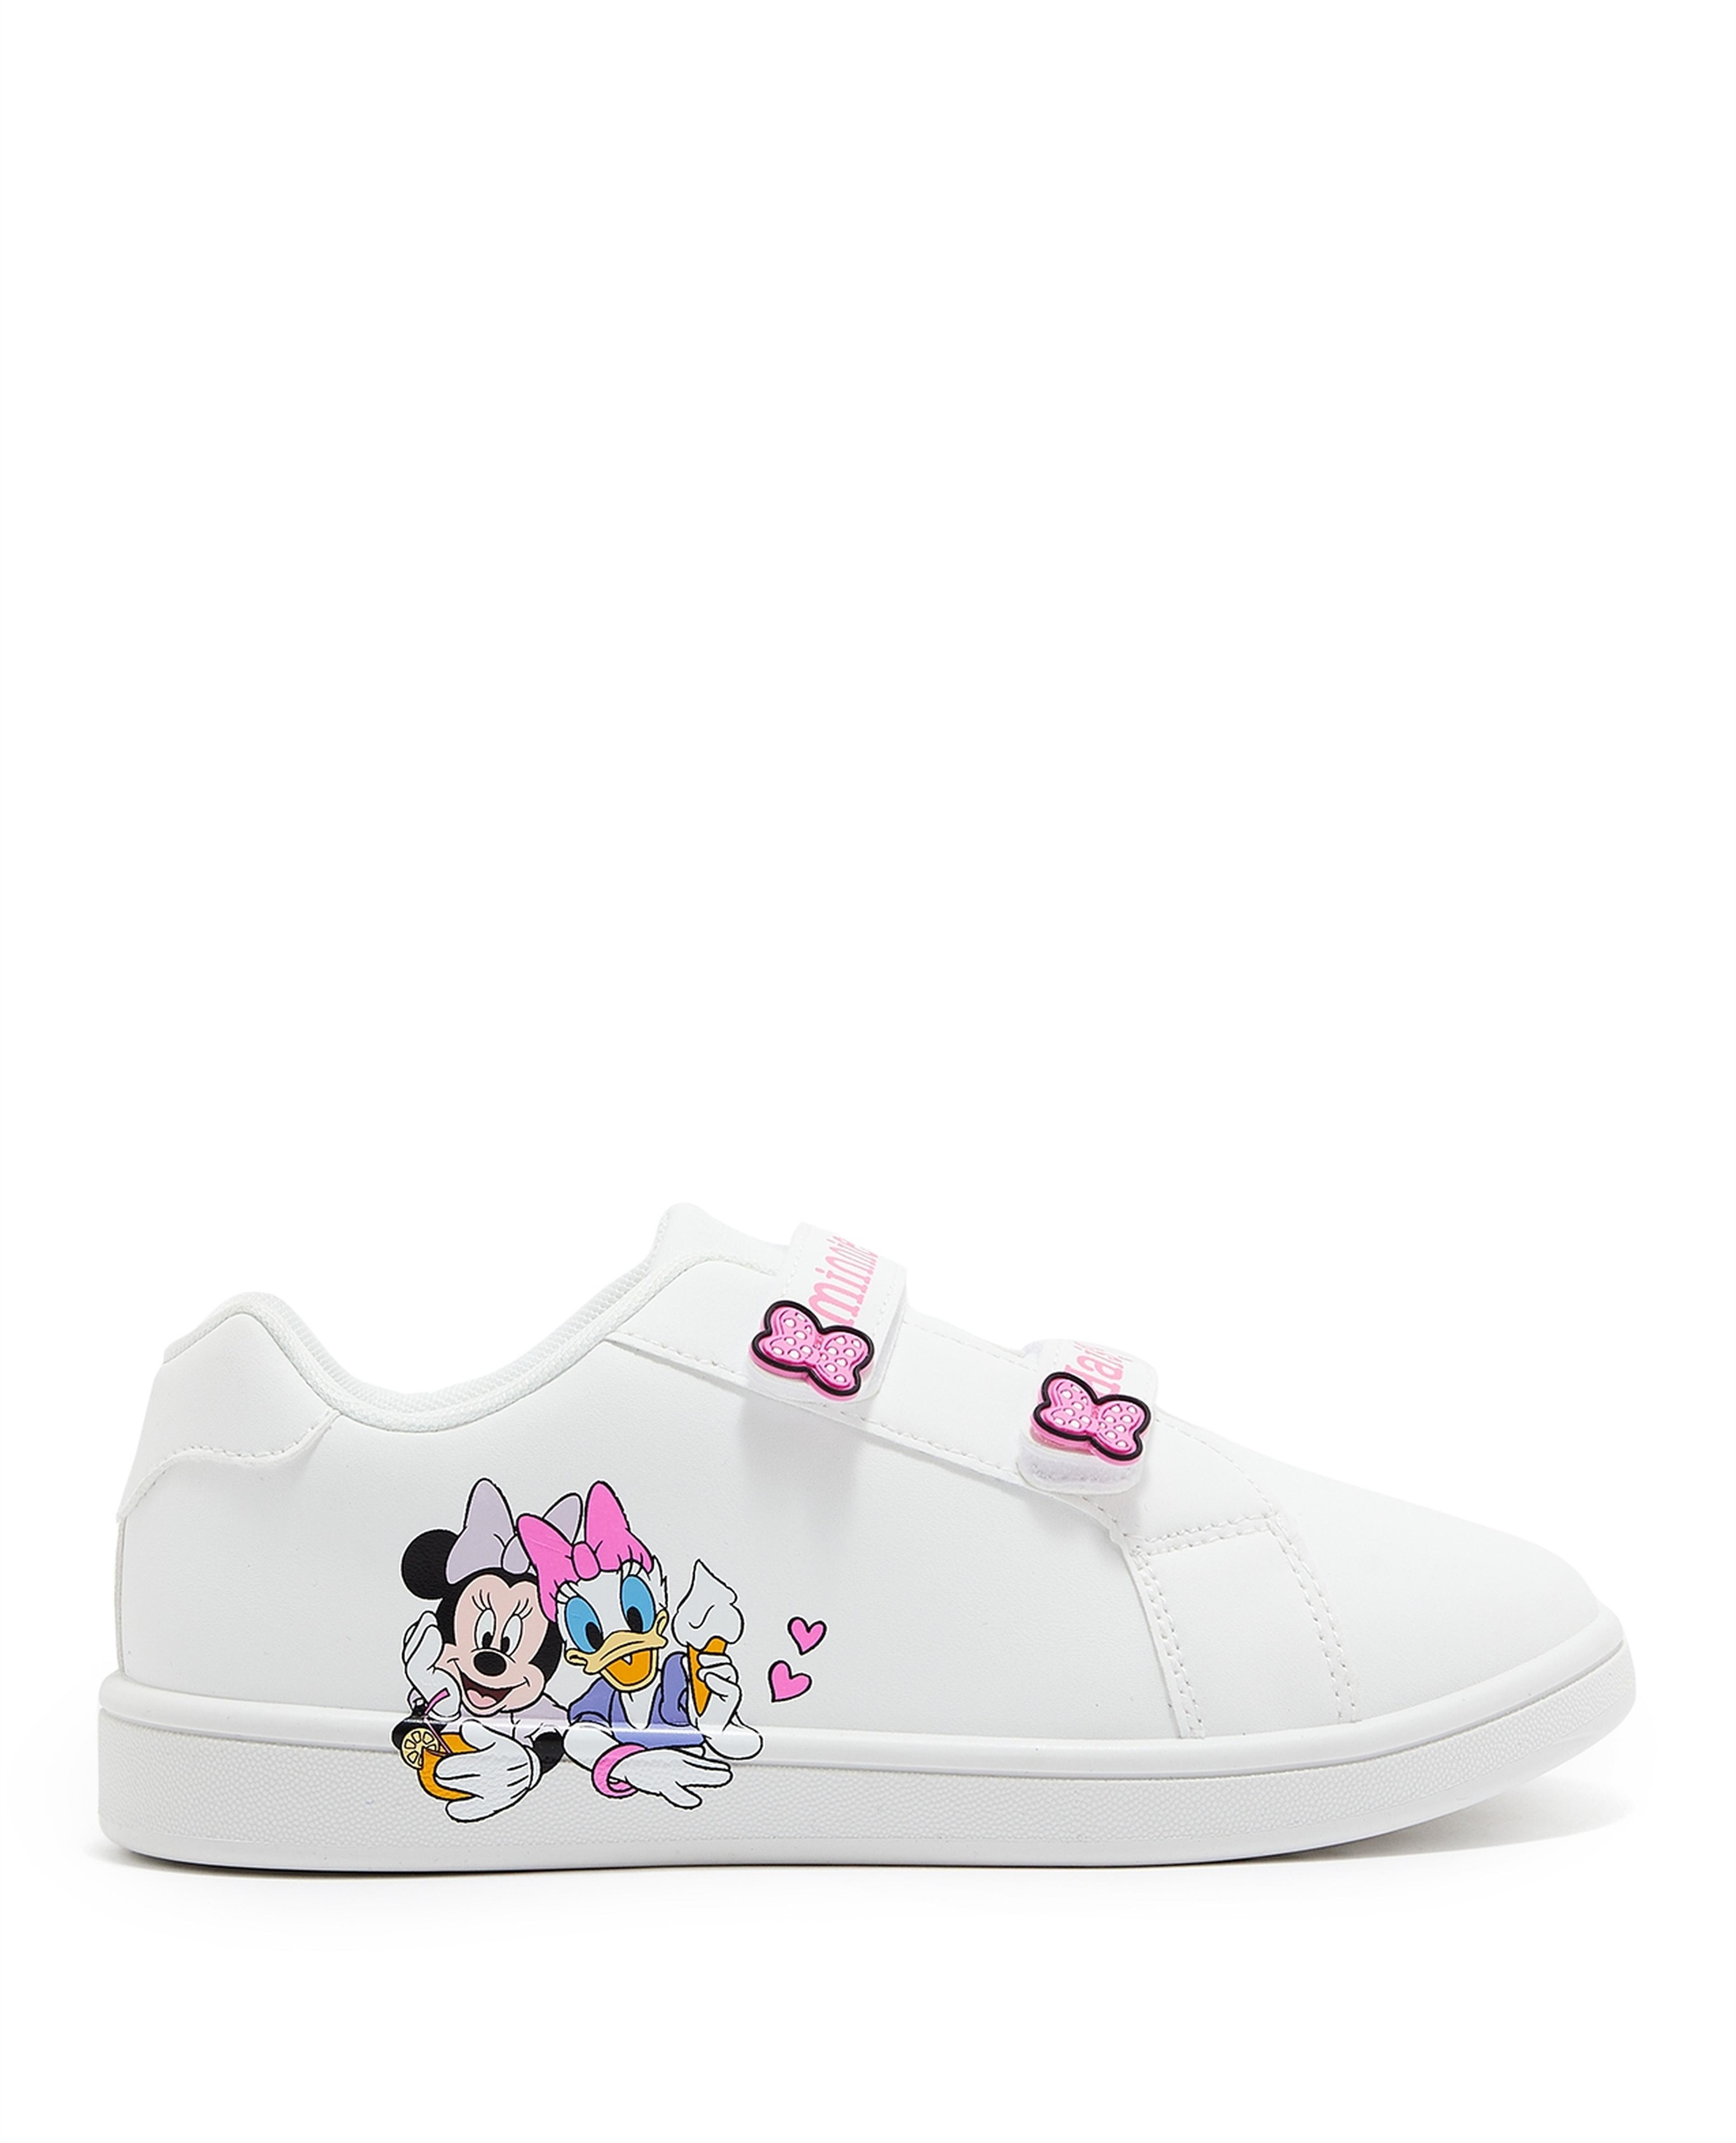 Minnie Mouse Print Velcro Sneakers